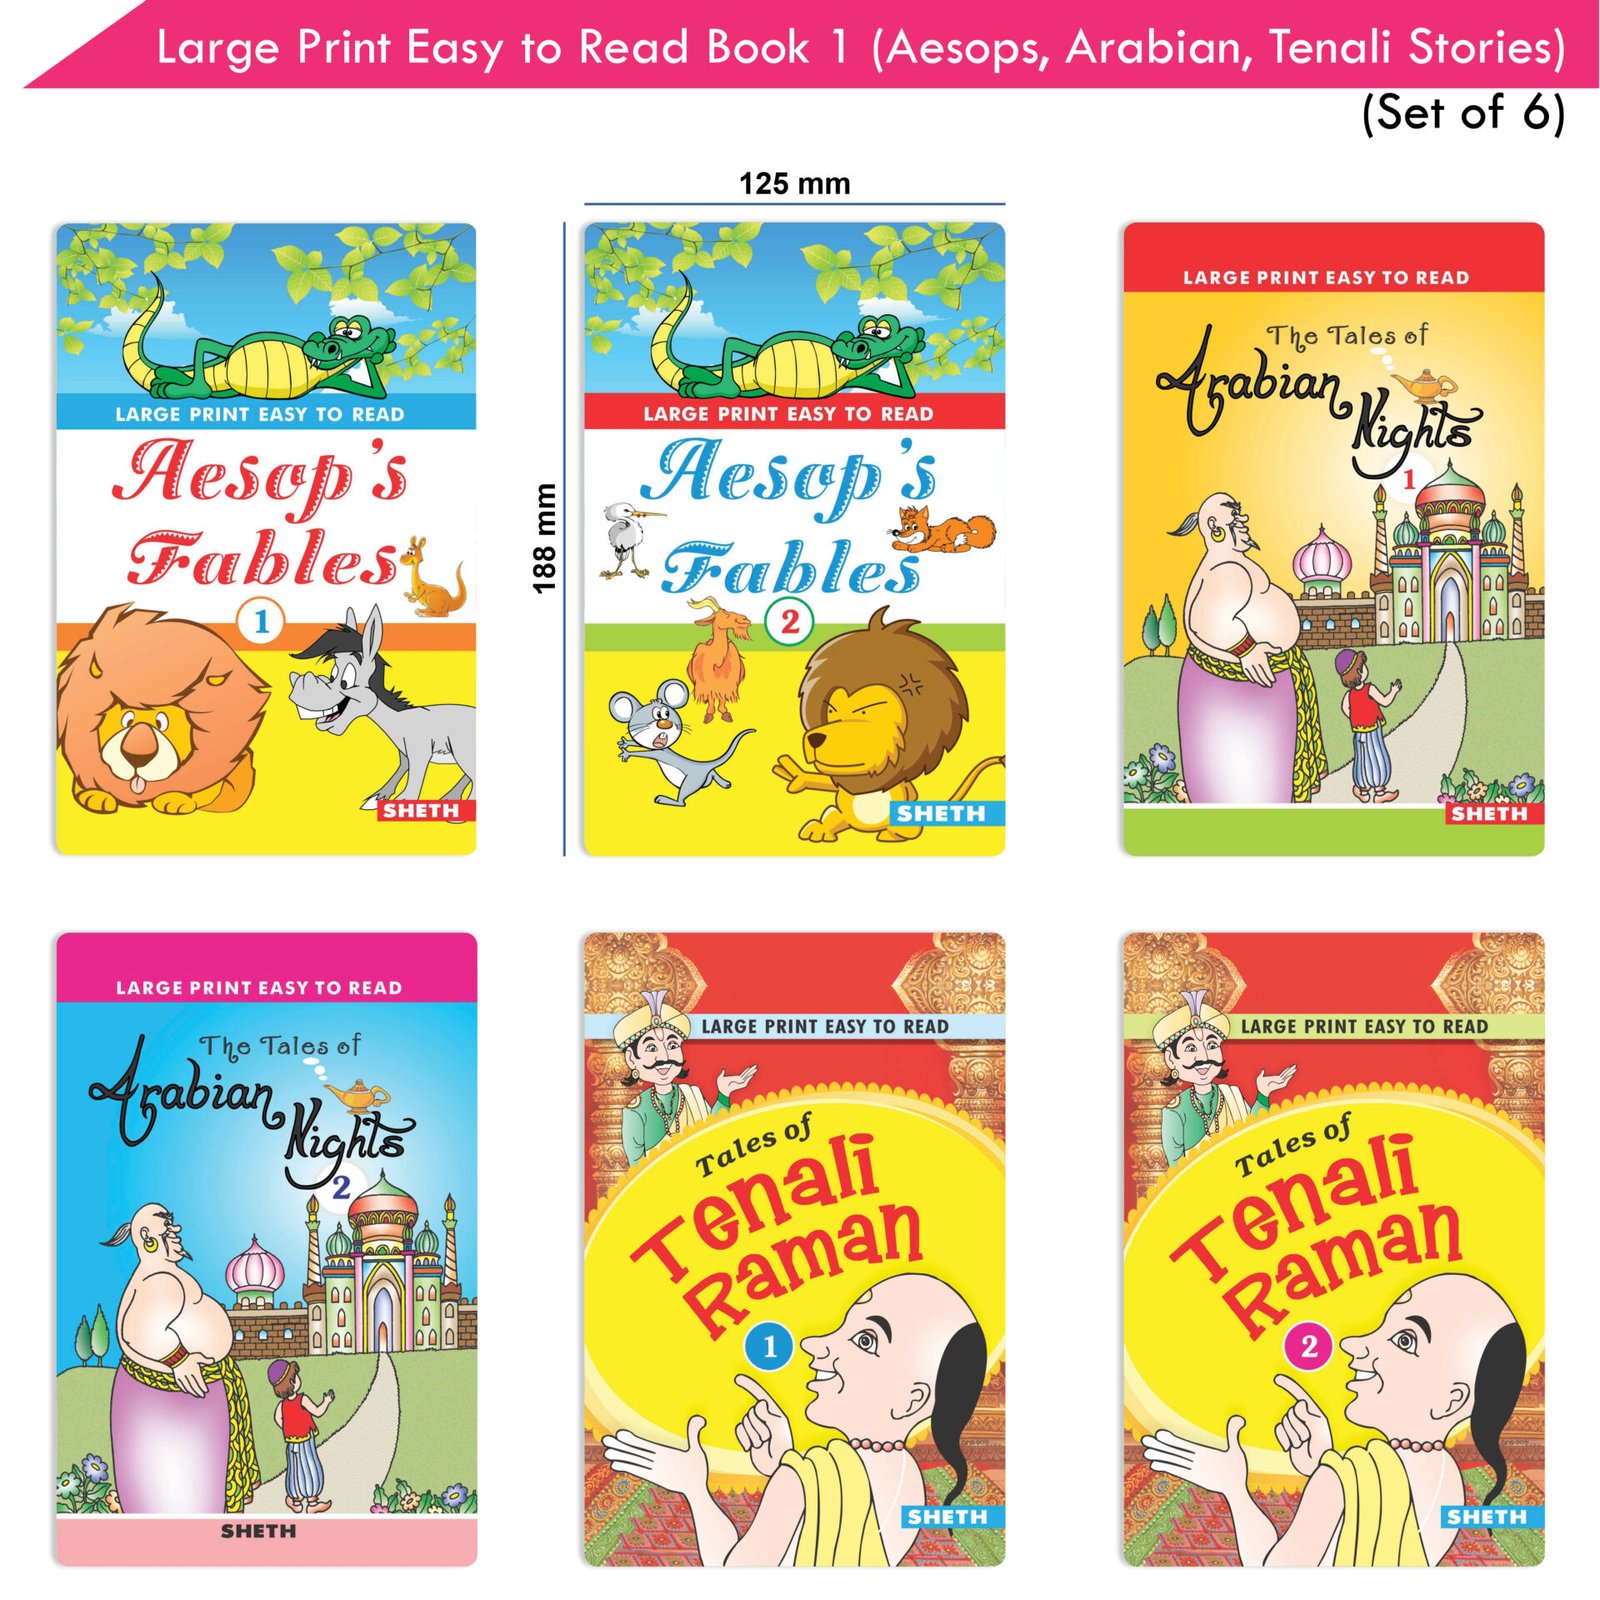 Large Print Easy to Read Book 1 Set of 6 2